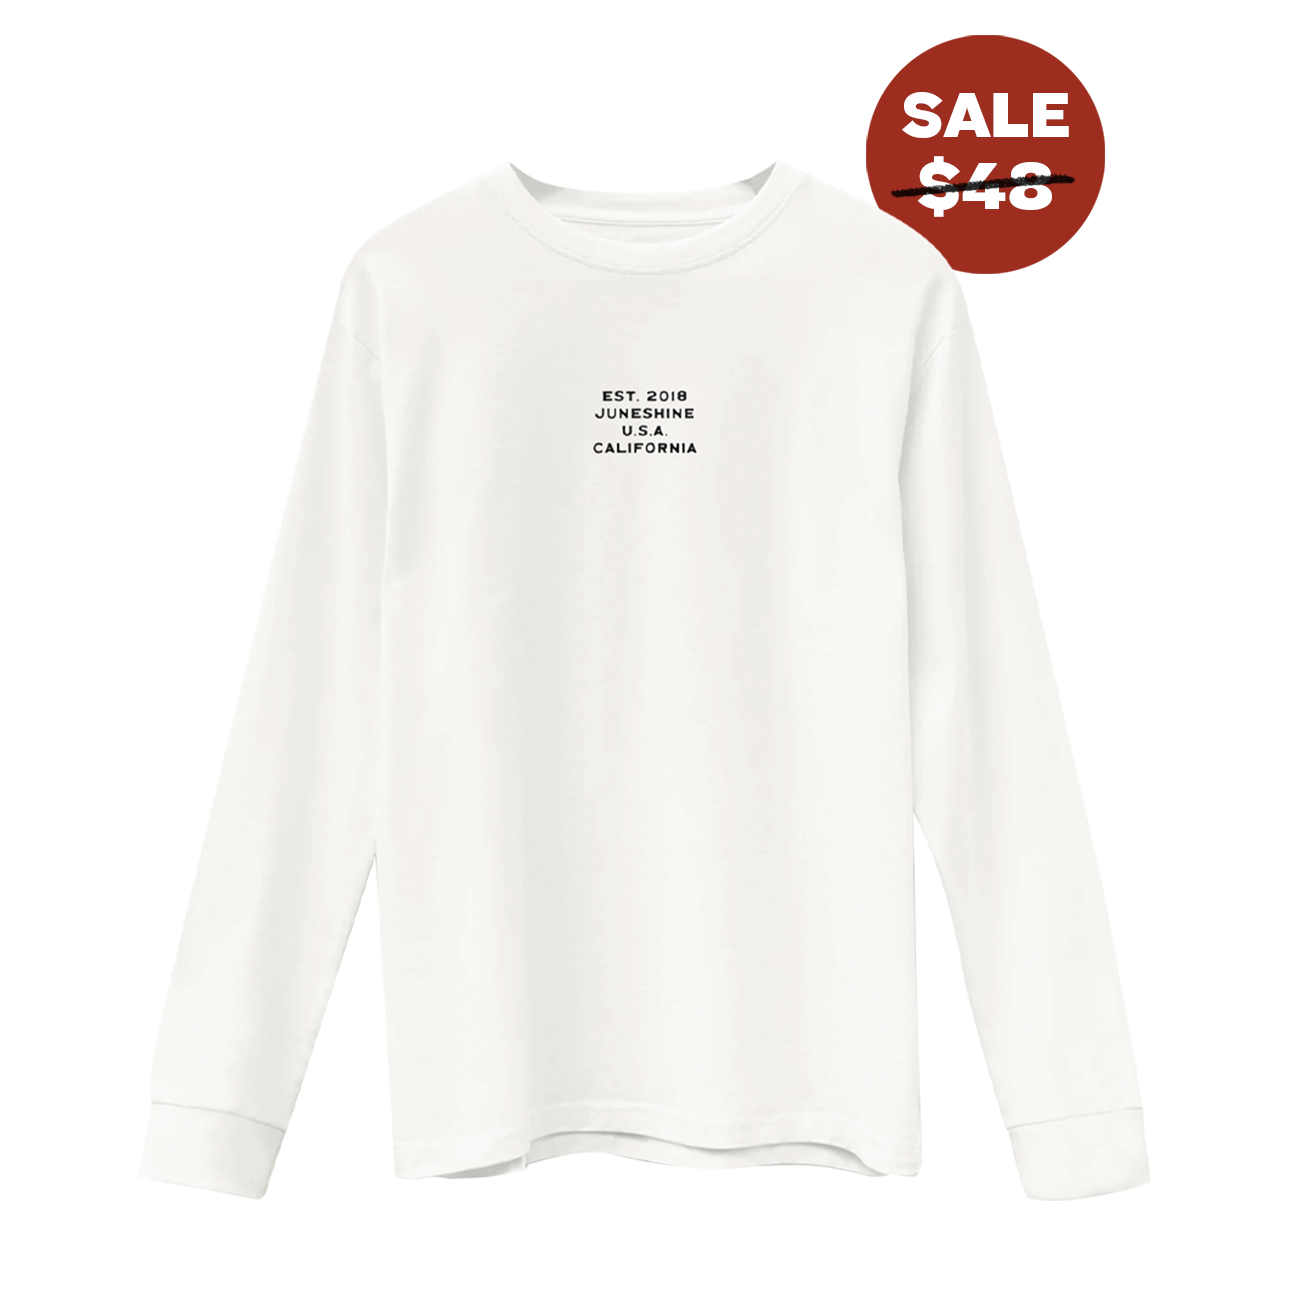 White long sleeve shirt with writing in the middle that reads: est. 2018 june shine u.s.a. california.